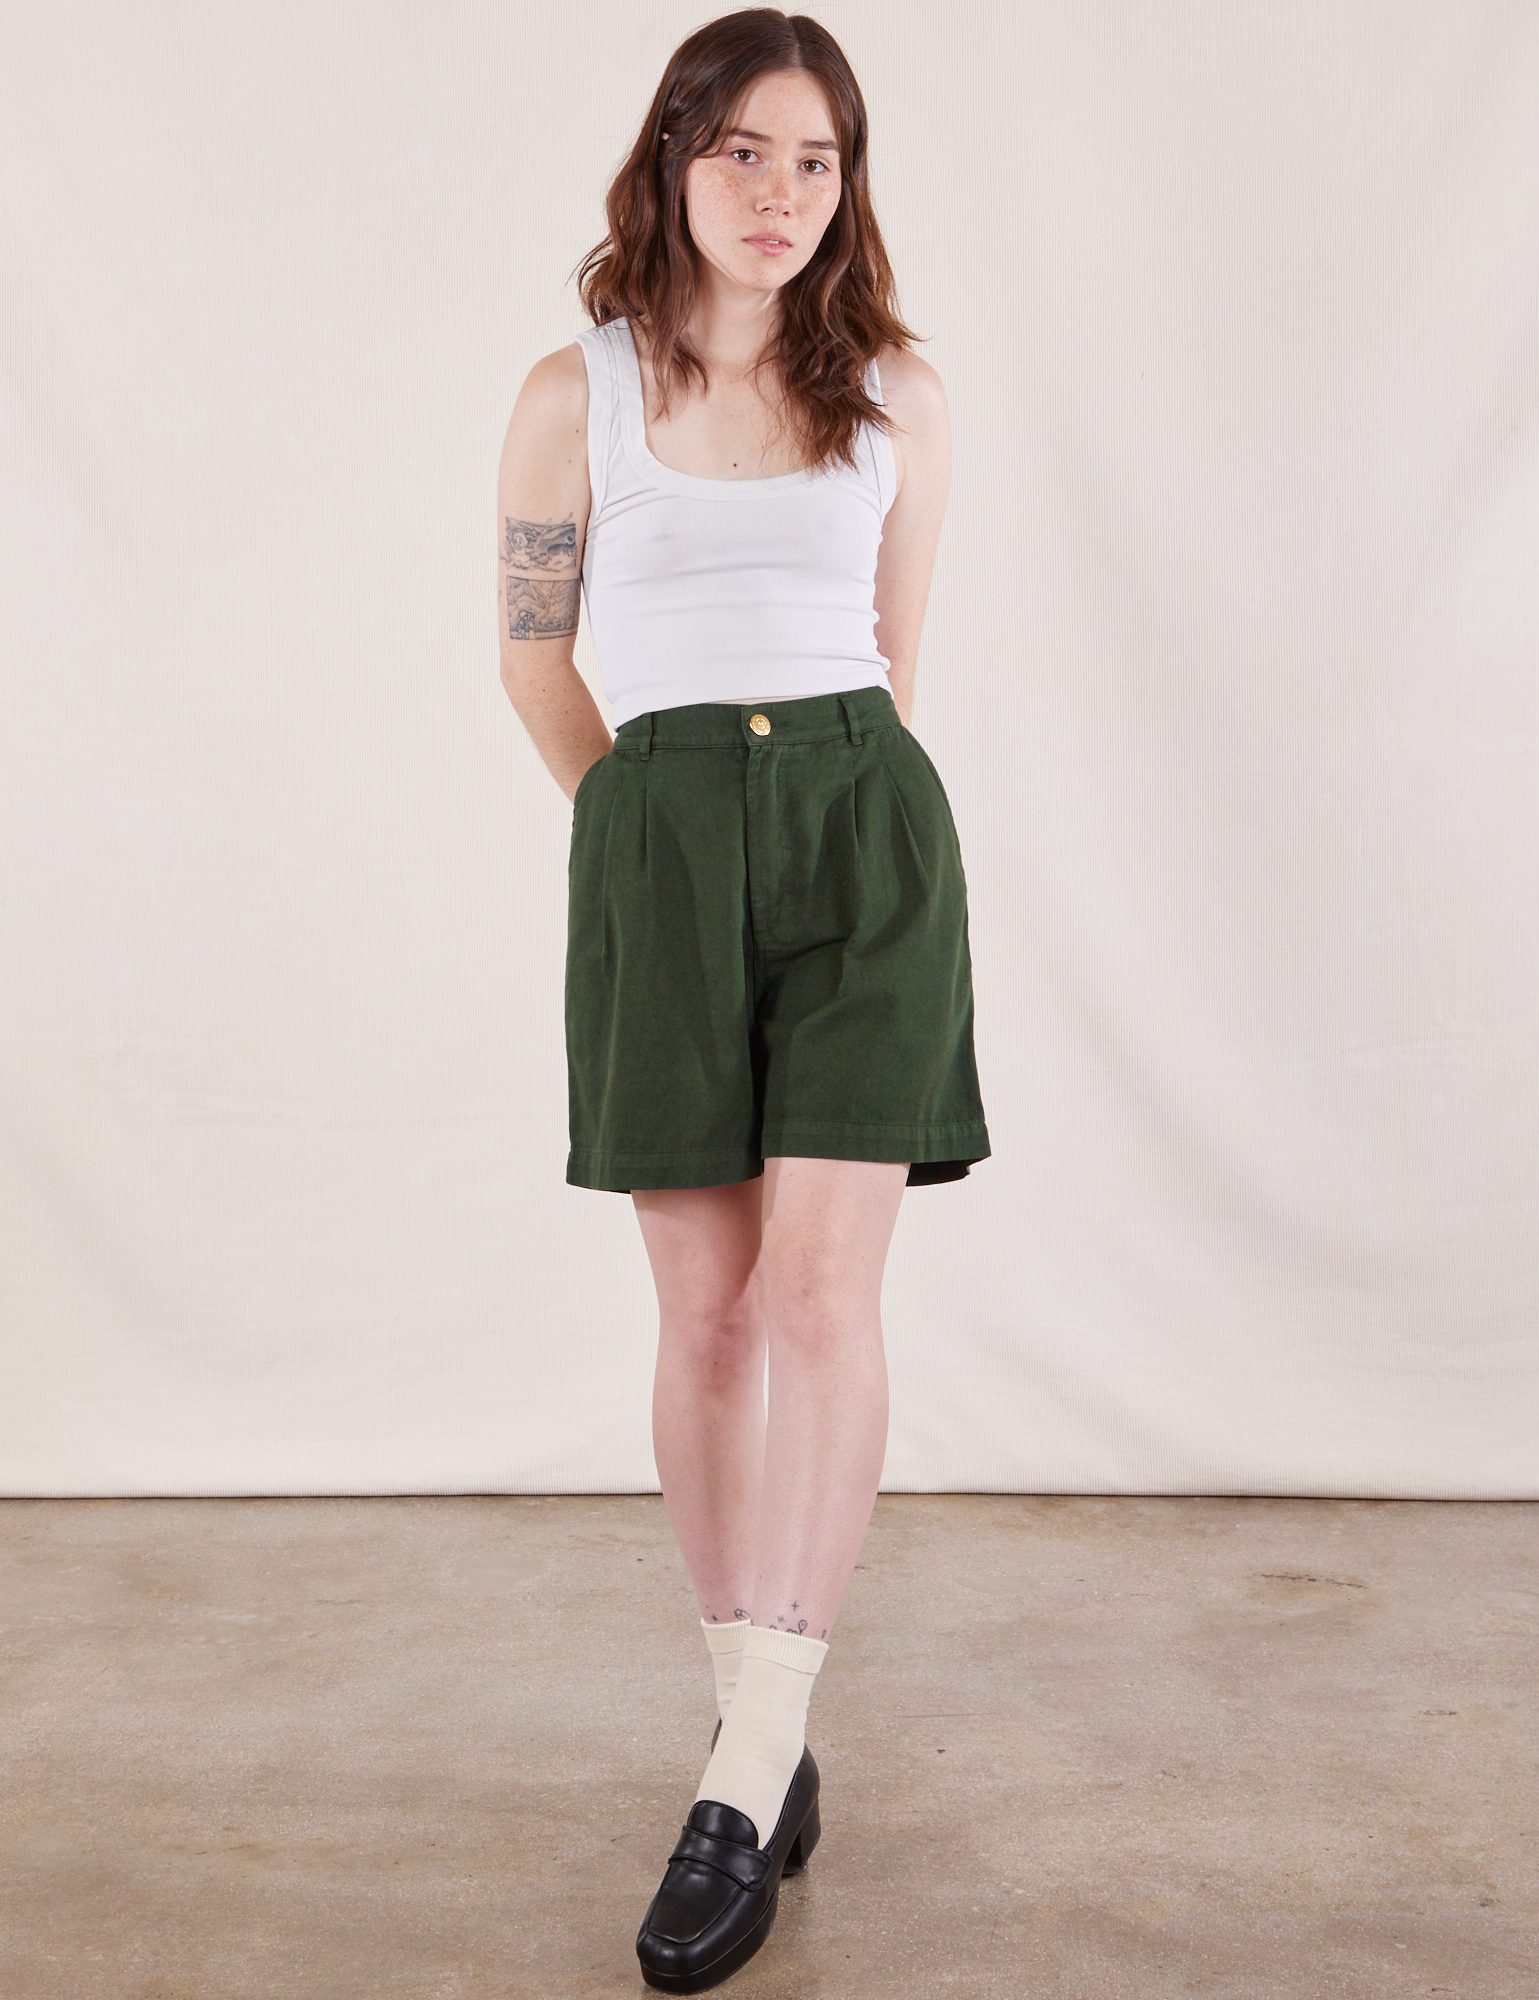 Hana is 5&#39;3&quot; and wearing XXS Trouser Shorts in Swamp Green paired with Cropped Tank Top in Vintage Tee Off-White